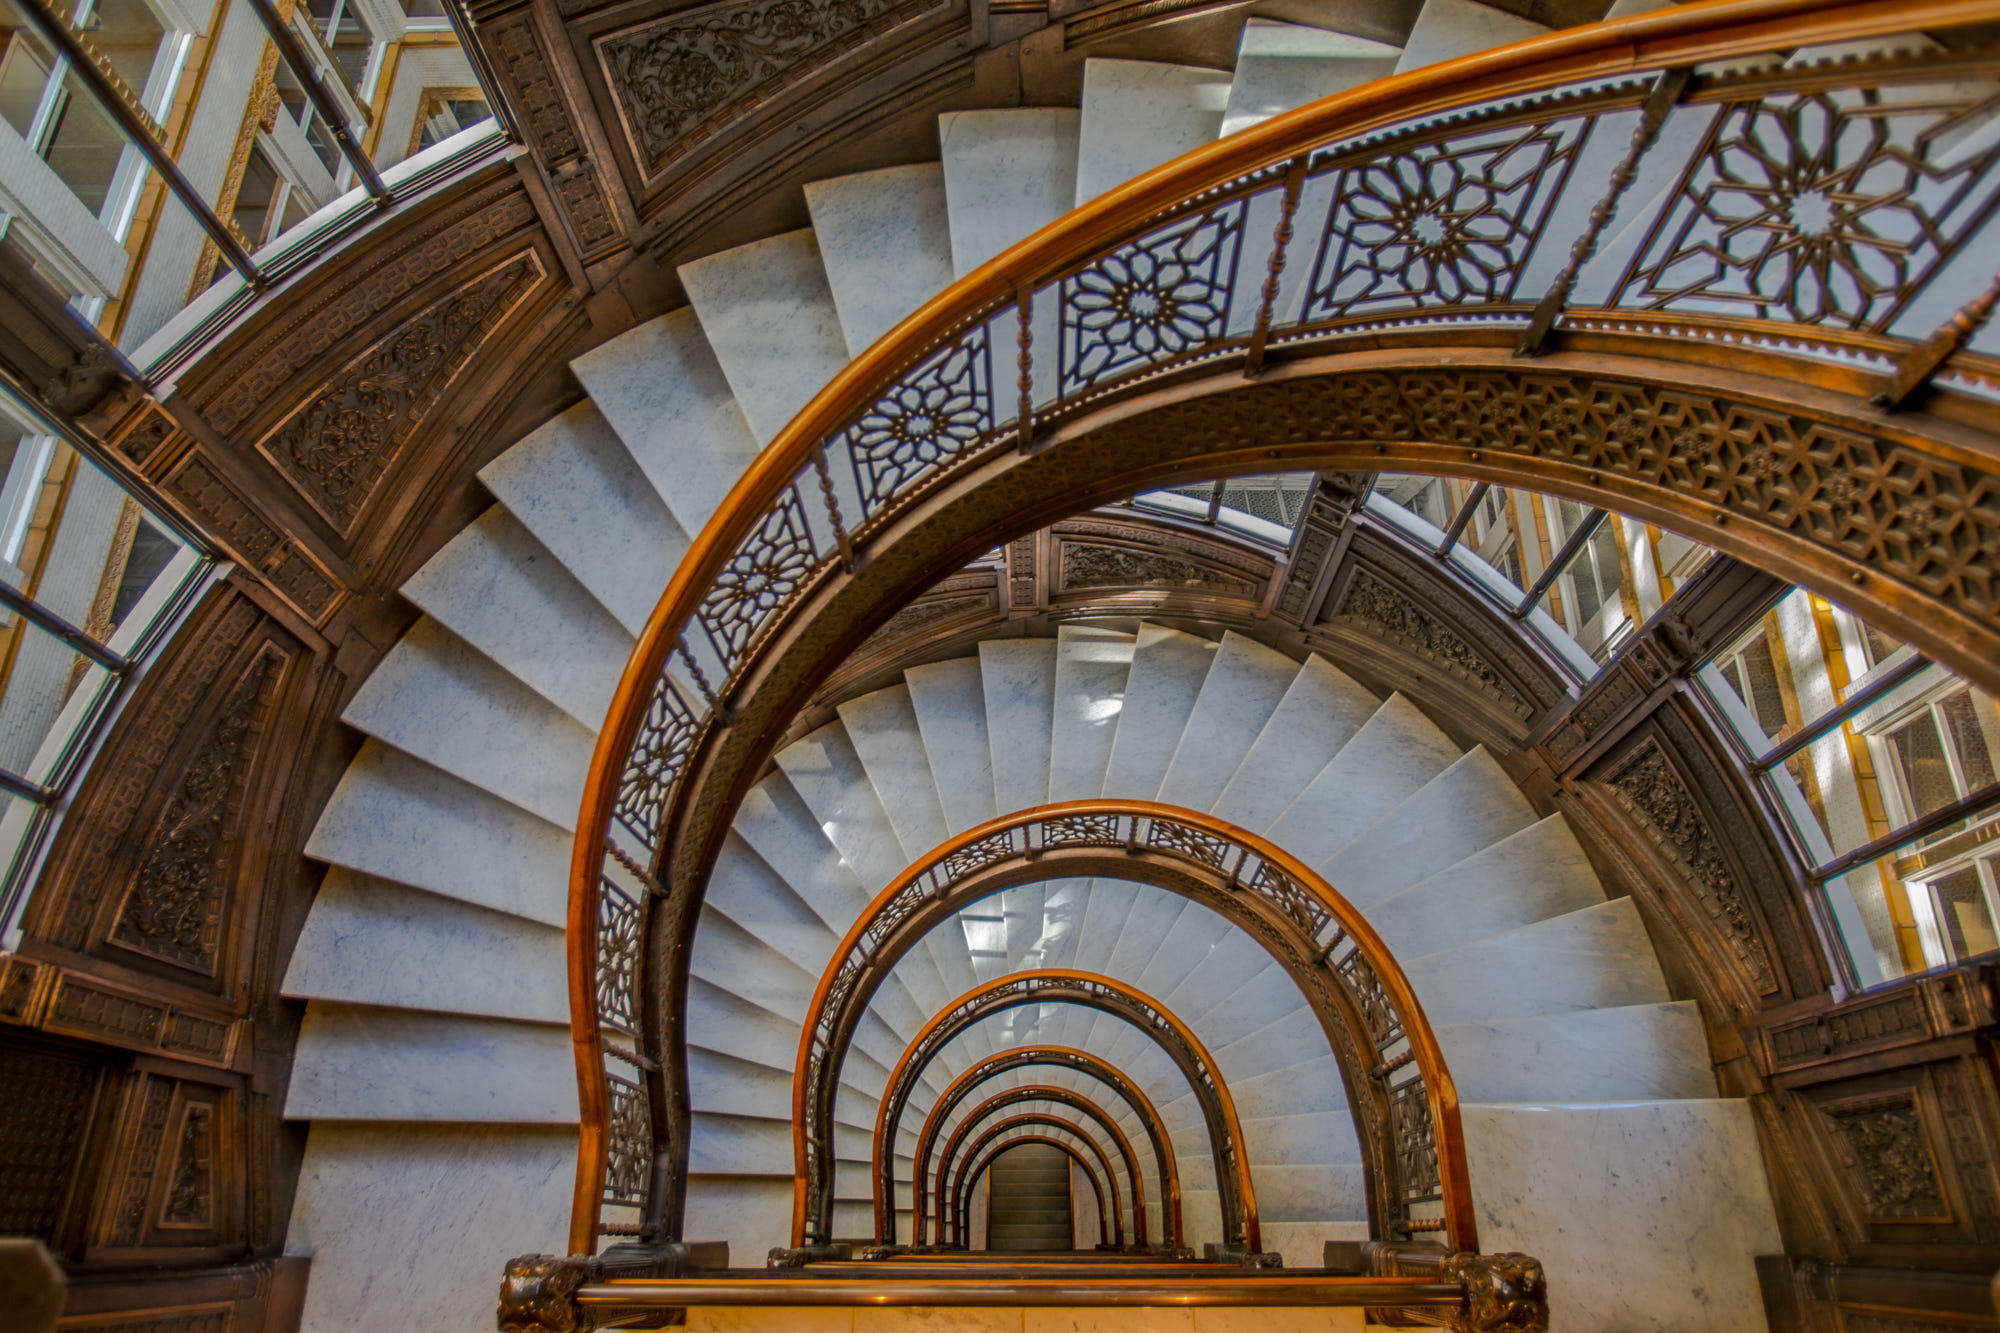 The Rookery Spiral, Chicago